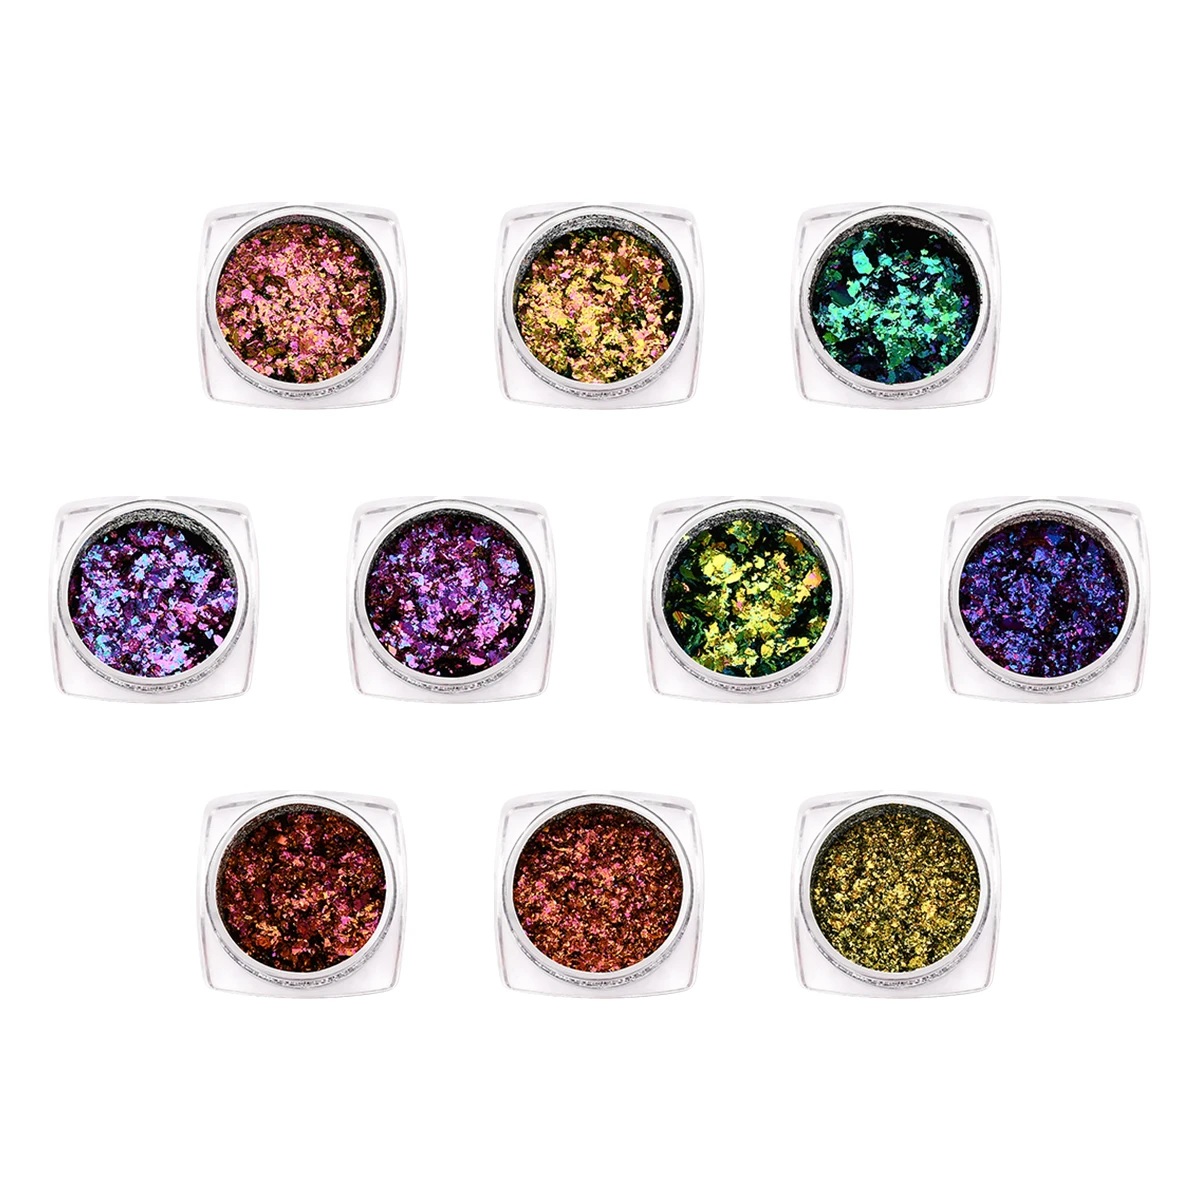 

BEAUTYBIGBANG 0.1g Chameleon Effect Flake For Nails Sequins Mirror Powder Chrome Pigment Paillettes Glitter For Nails Dust